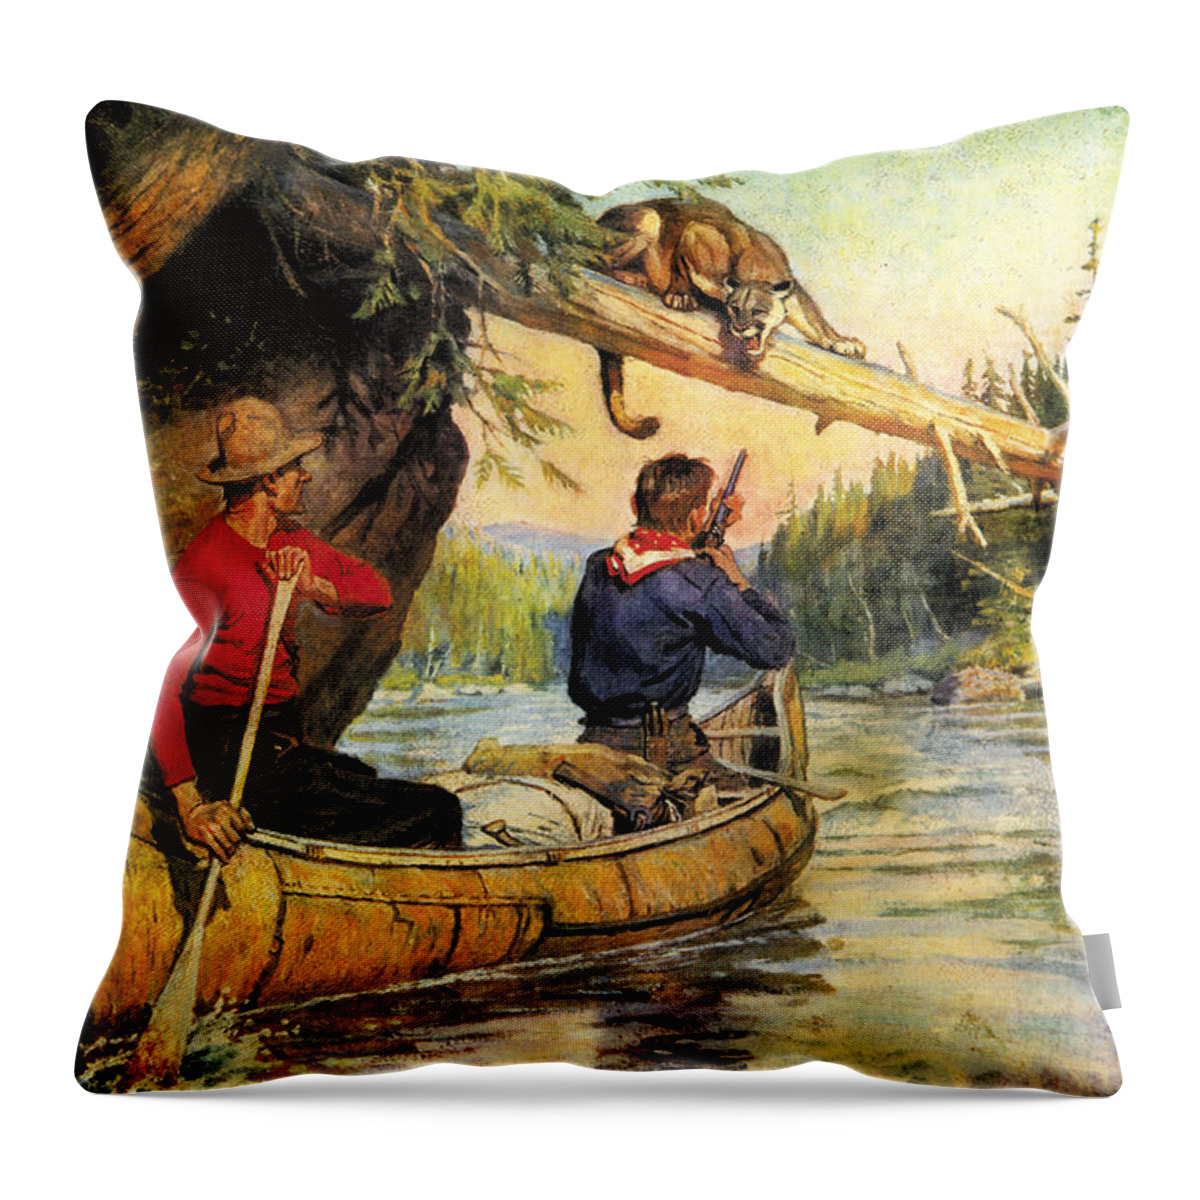 Phillip Goodwin Throw Pillow featuring the painting Dangerous Encounter by JQ Licensing